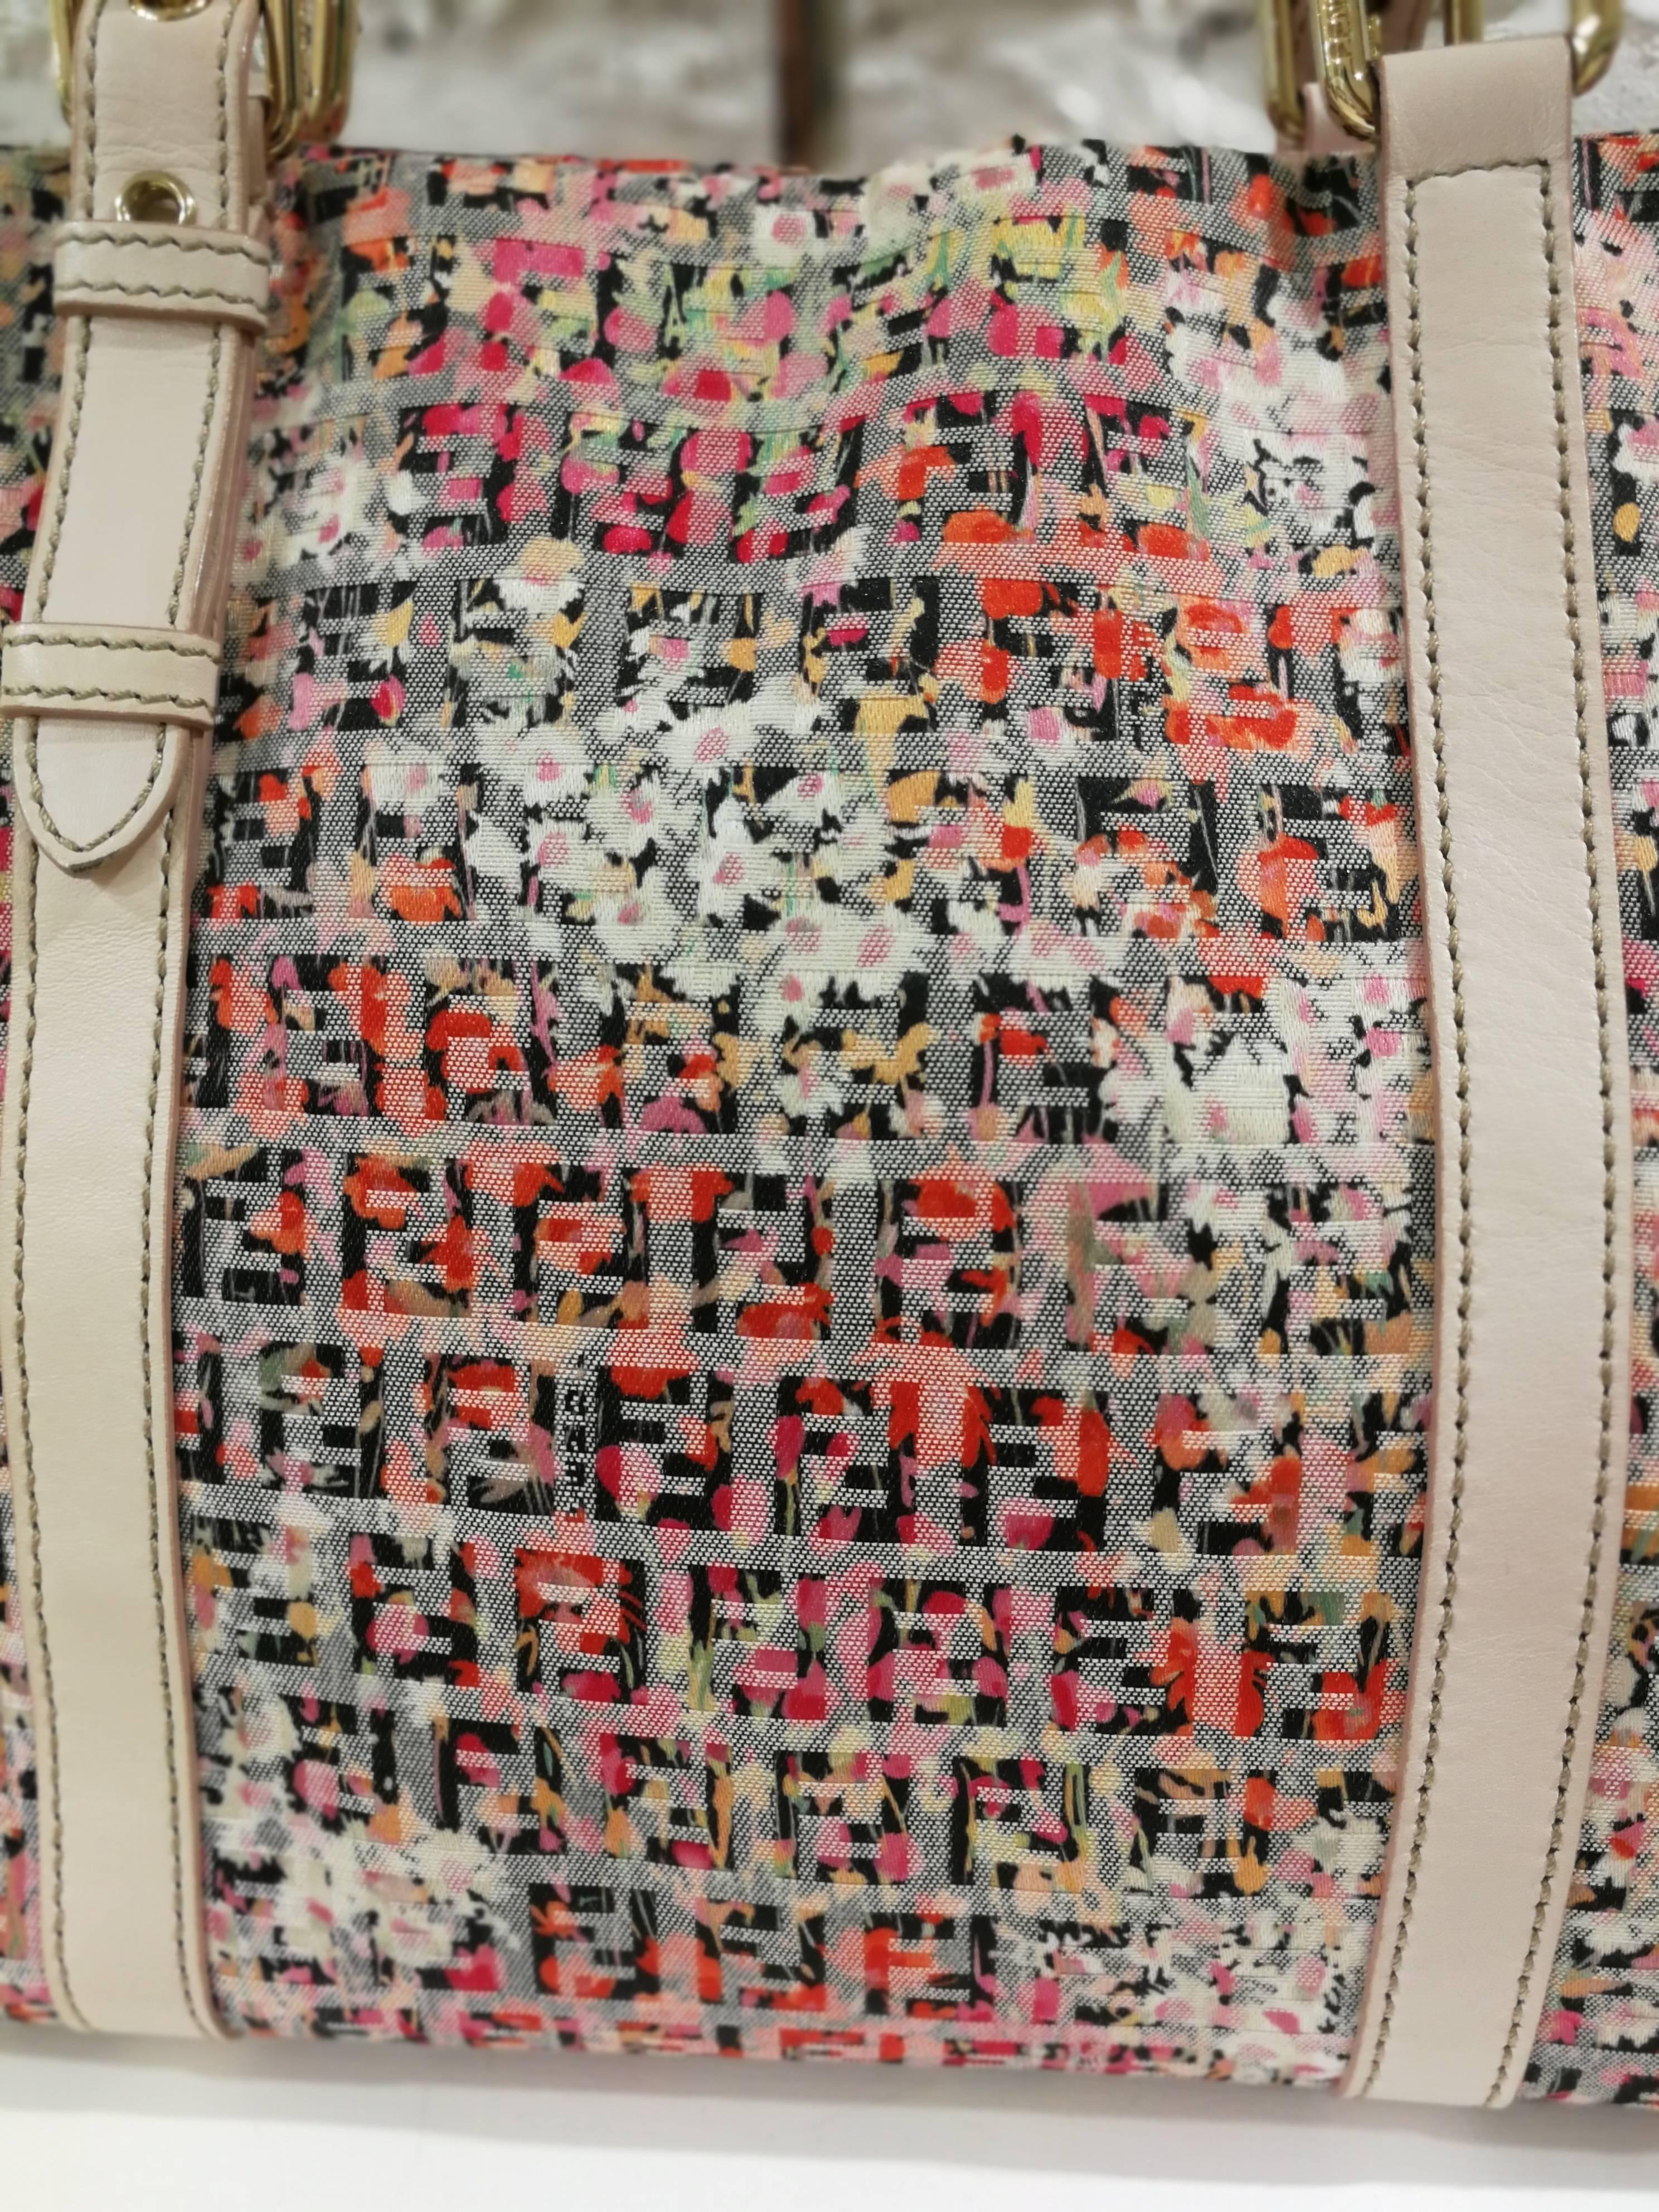 Fendi FF logo Multicolour Flower Shoulder Bag

Limited Edition bag by Fendi totally made in italy

flowers print all over on the FF textile logo 

pink leather